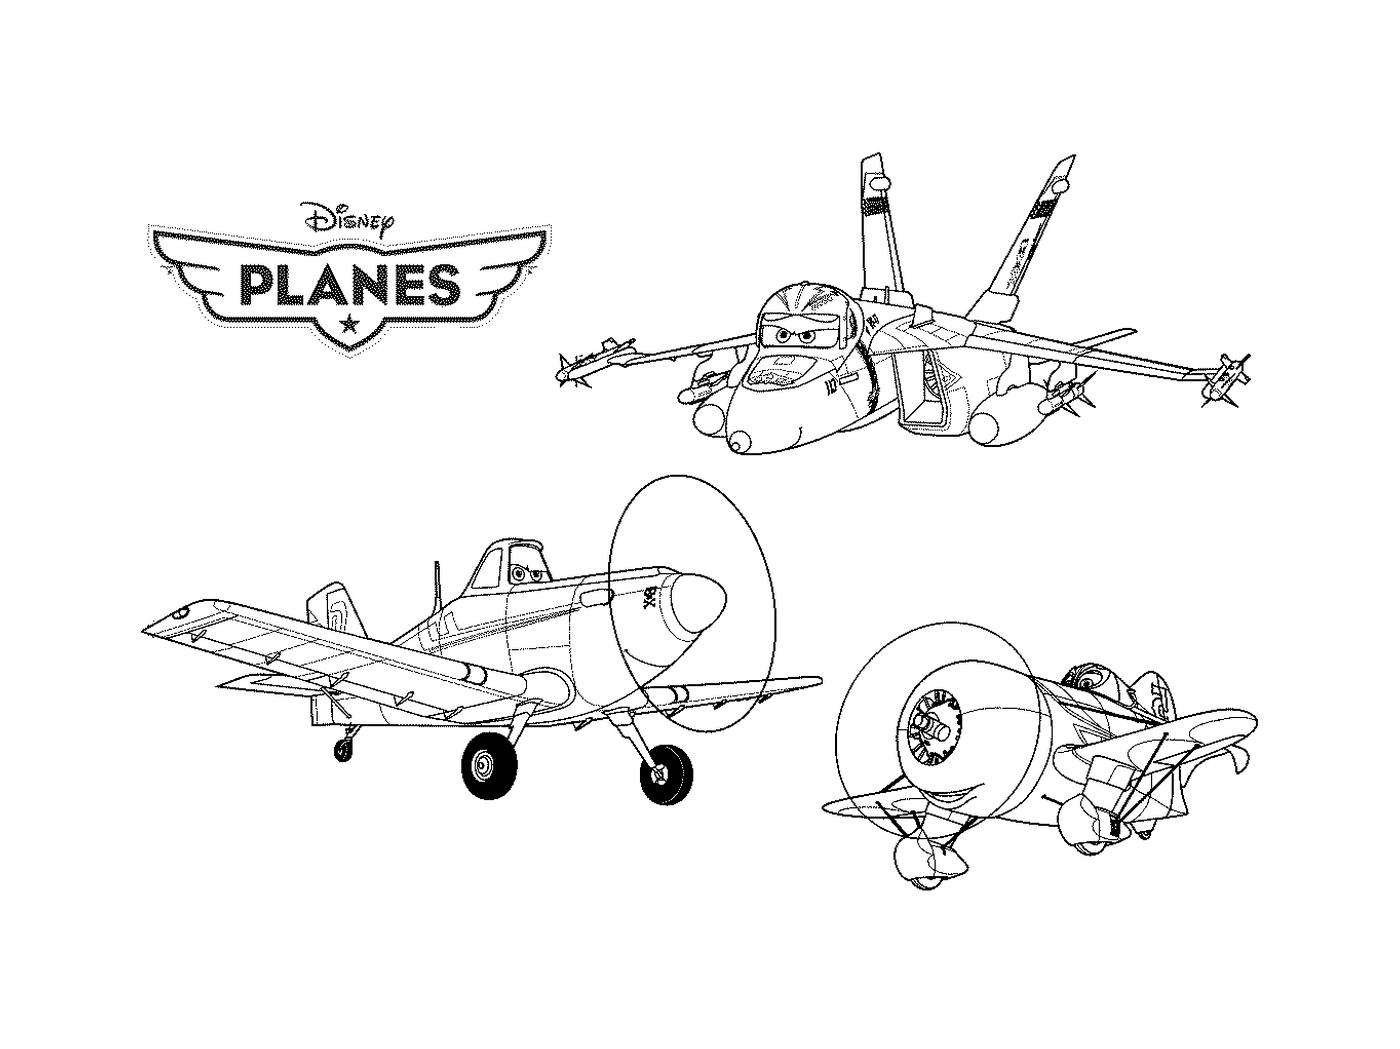  A set of three drawings of a plane 